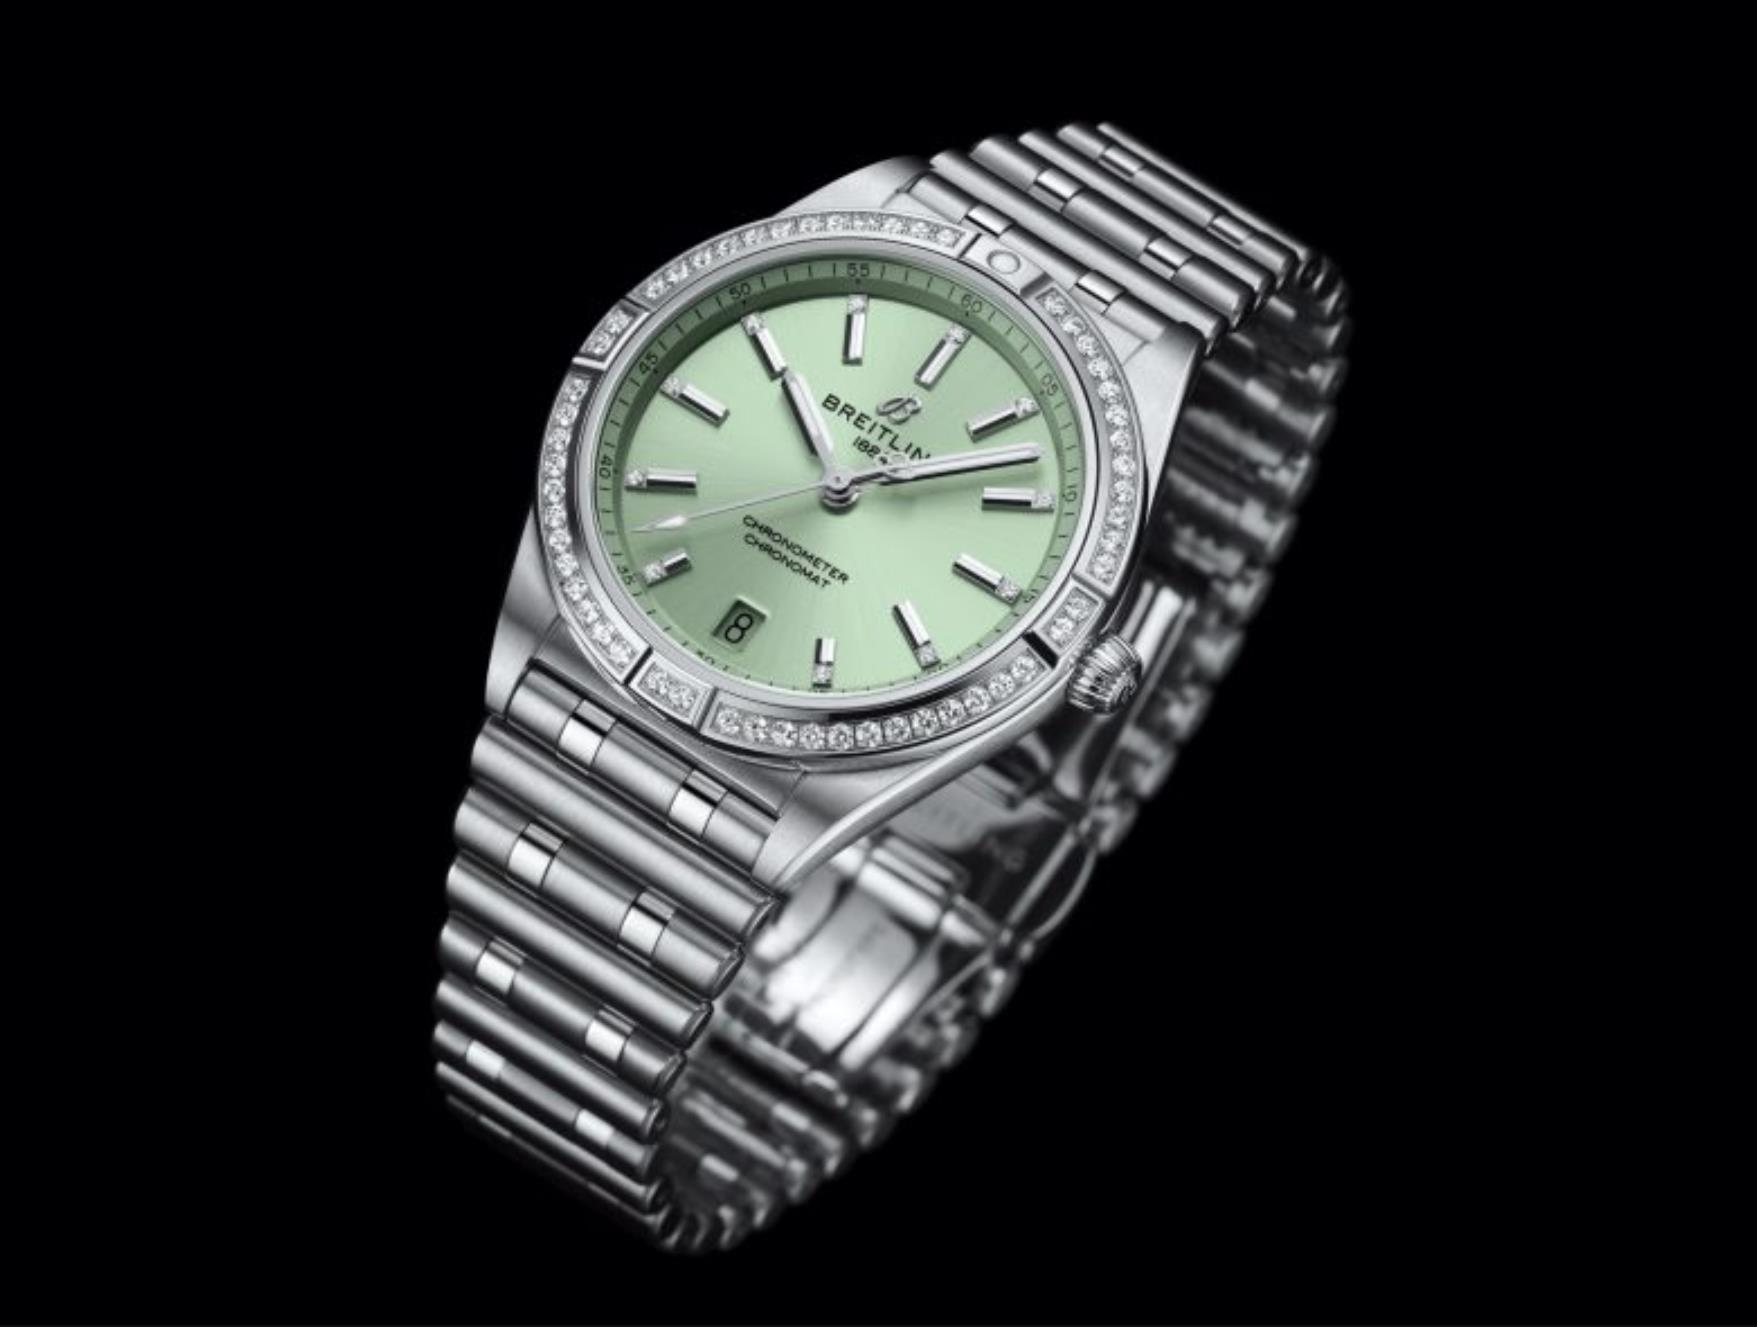 The mint green dial fake watch is equipped with caliber 10.